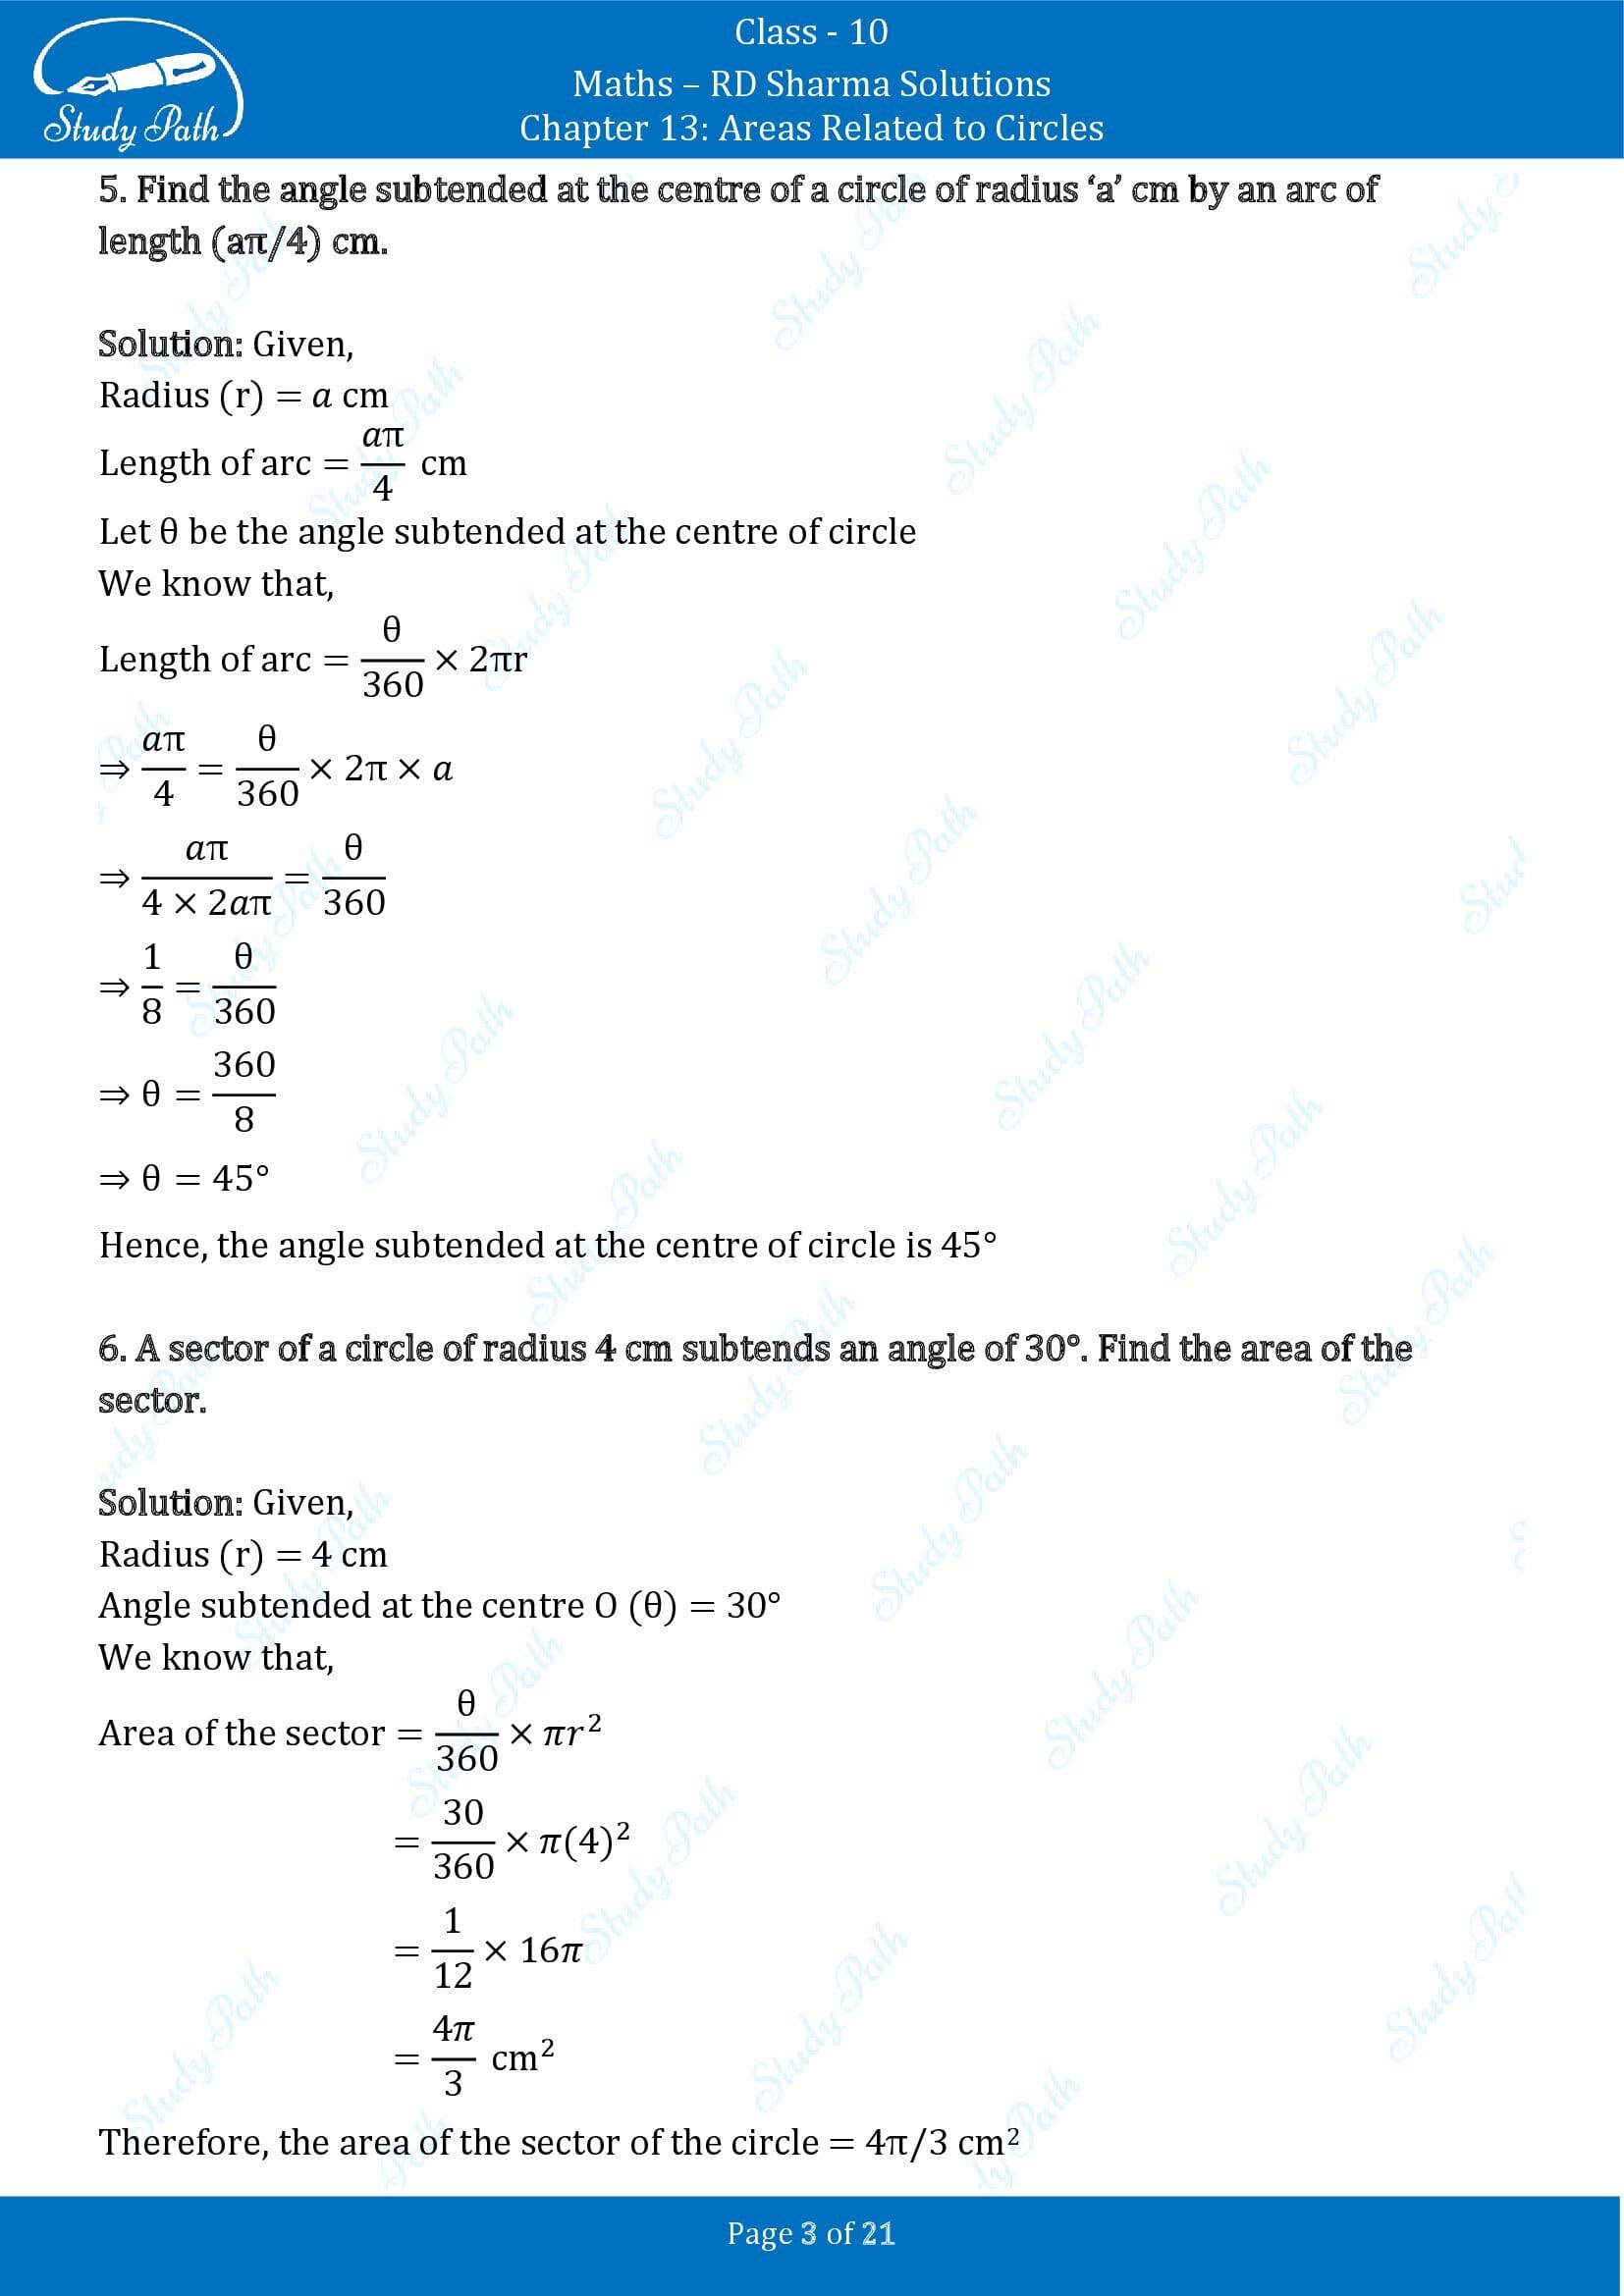 RD Sharma Solutions Class 10 Chapter 13 Areas Related to Circles Exercise 13.2 00003